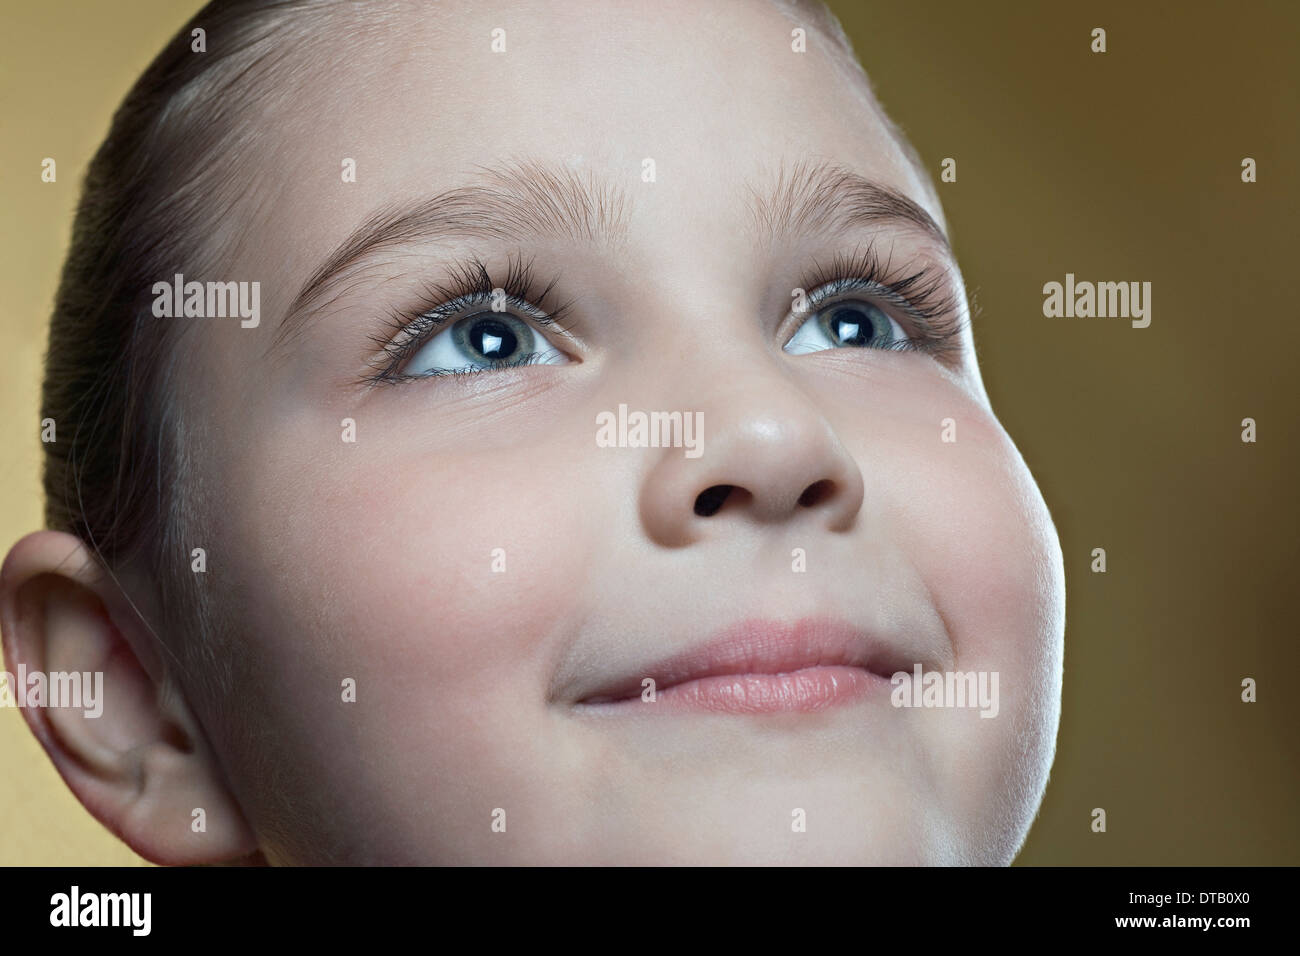 Girl looking up and smiling, close-up Stock Photo